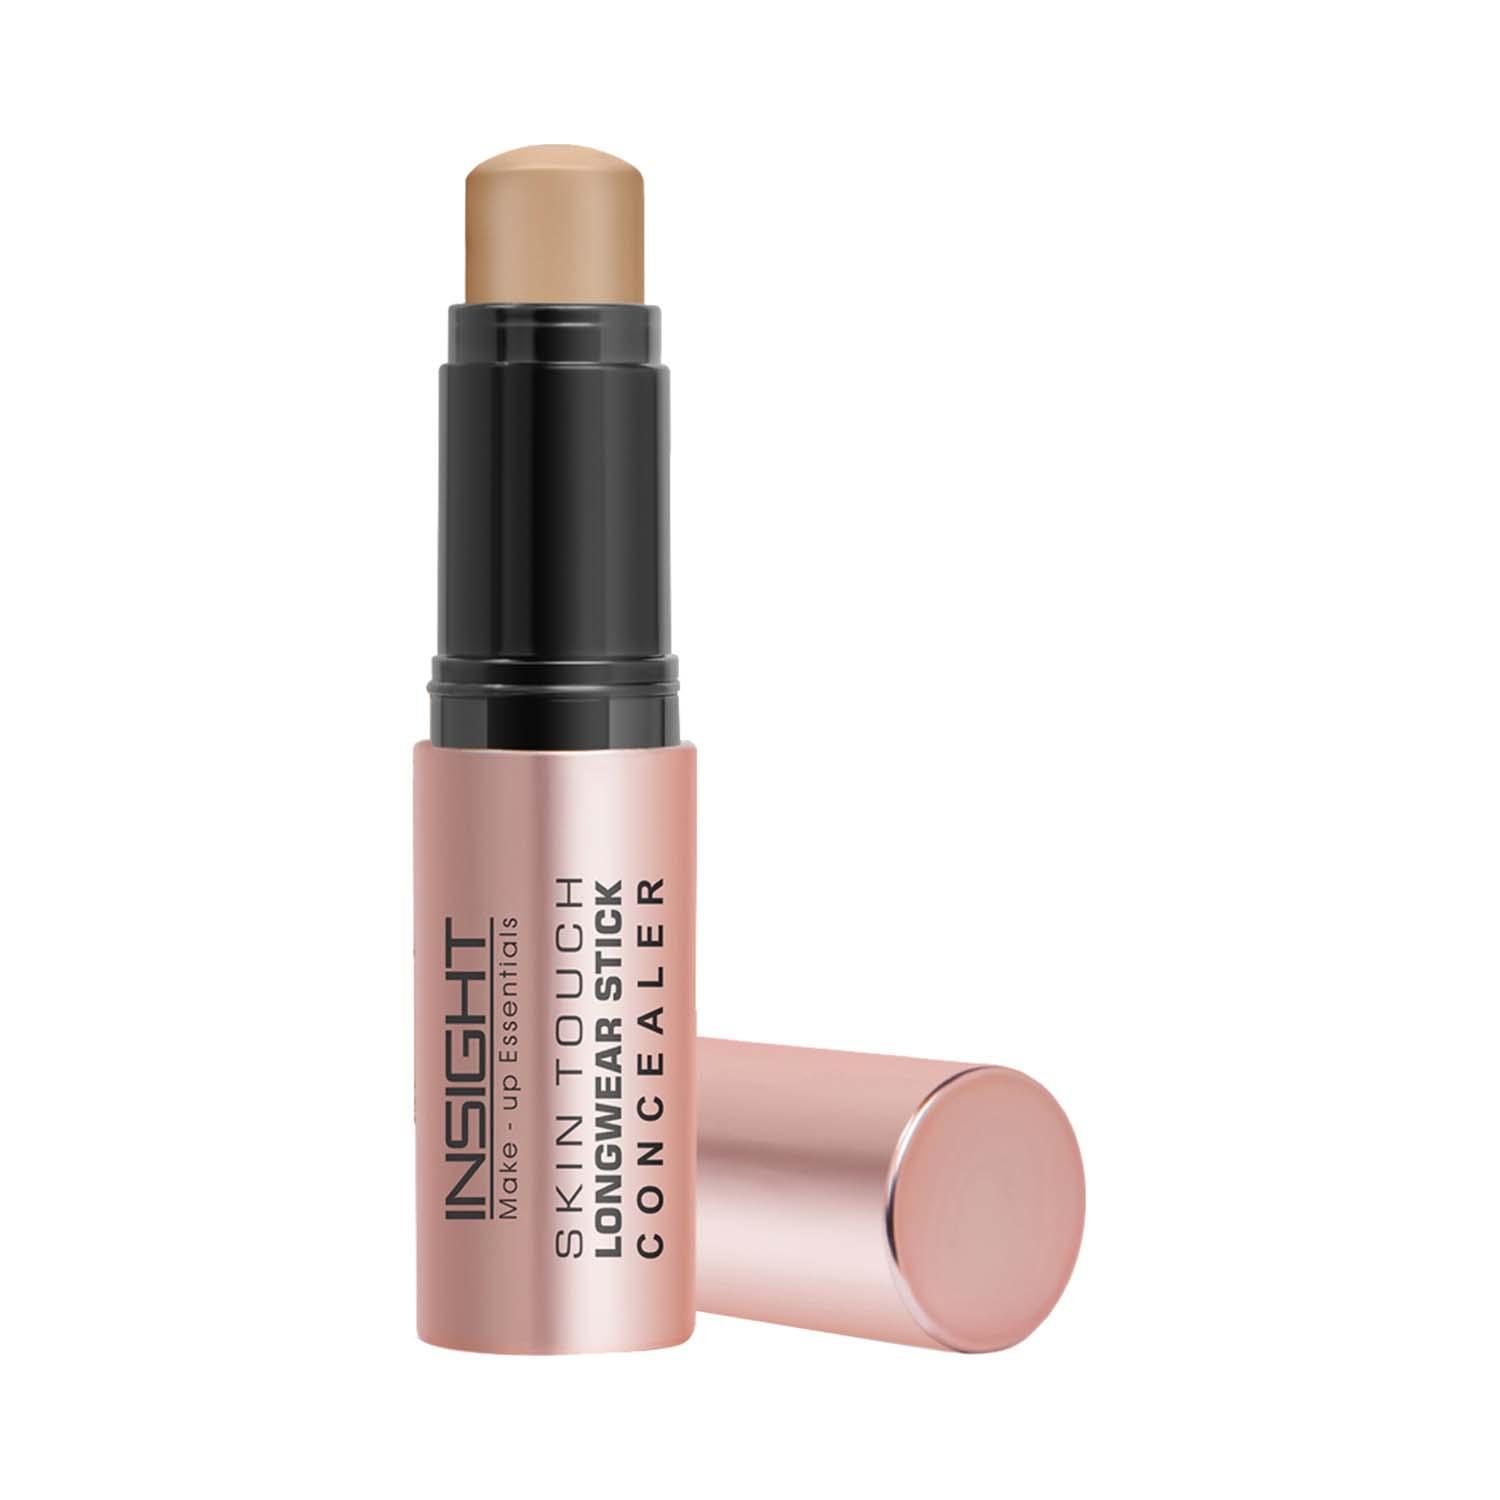 Insight Cosmetics | Insight Cosmetics Skin Touch Longwear Concealer - MN18 (5 g)